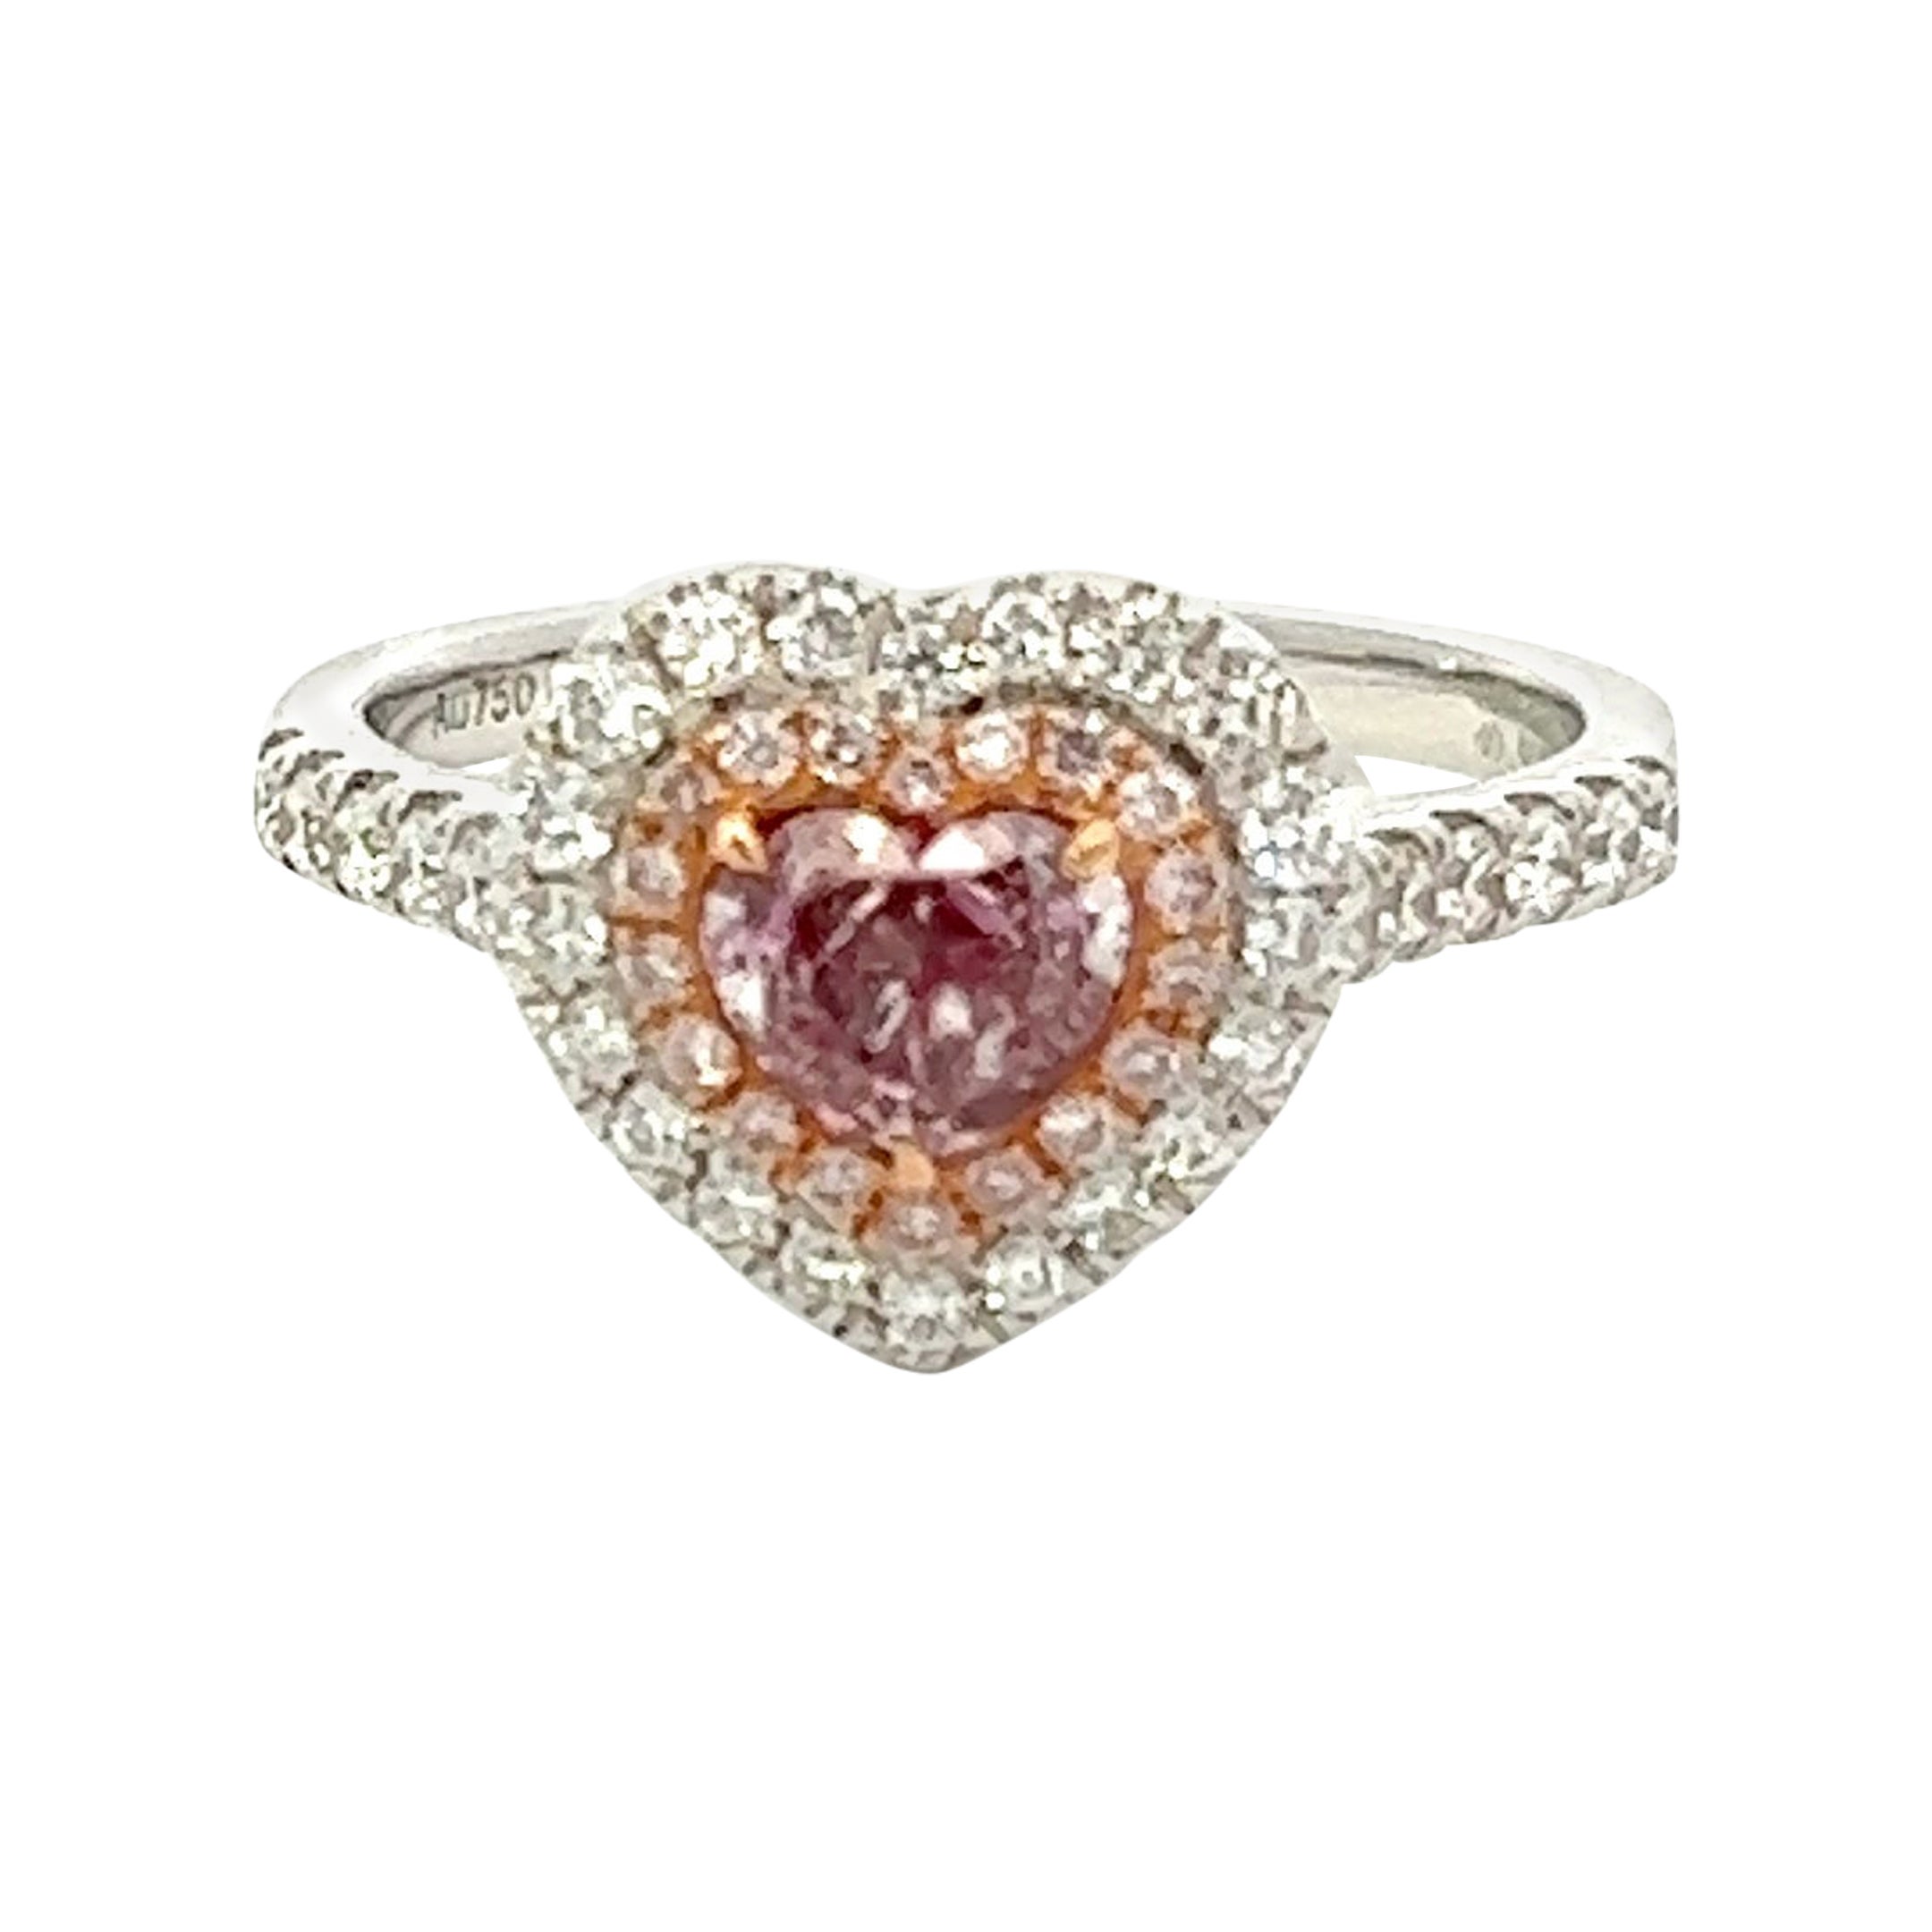 GIA Certified 0.59 Carat Fancy Pink Diamond Ring For Sale